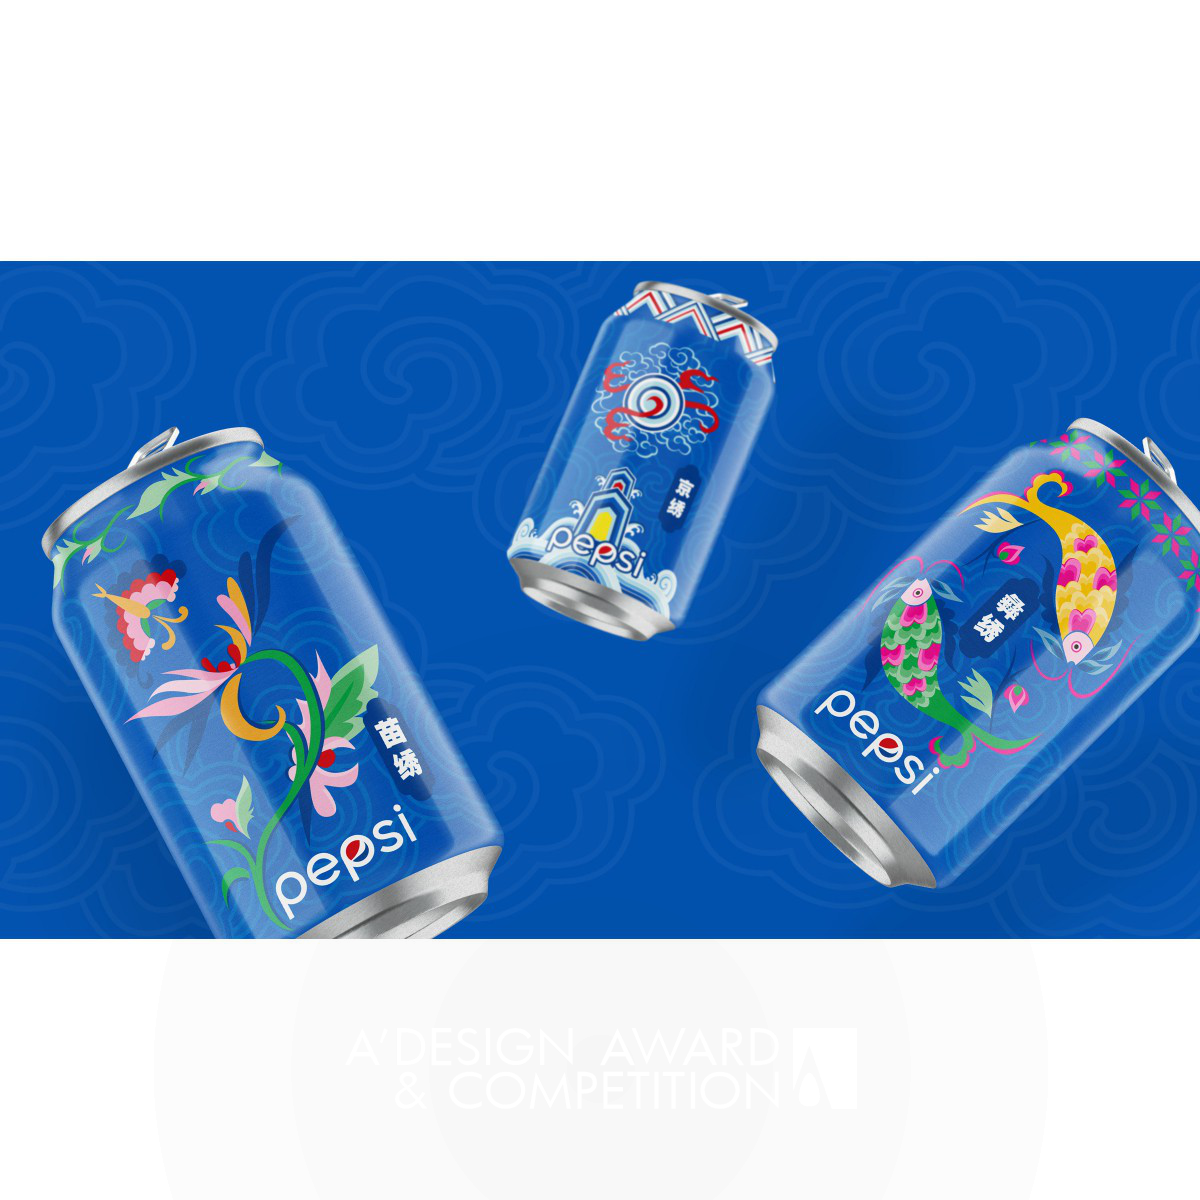 PepsiCo Design and Innovation wins Silver at the prestigious A' Packaging Design Award with Pepsi Mom Handworks Beverage.